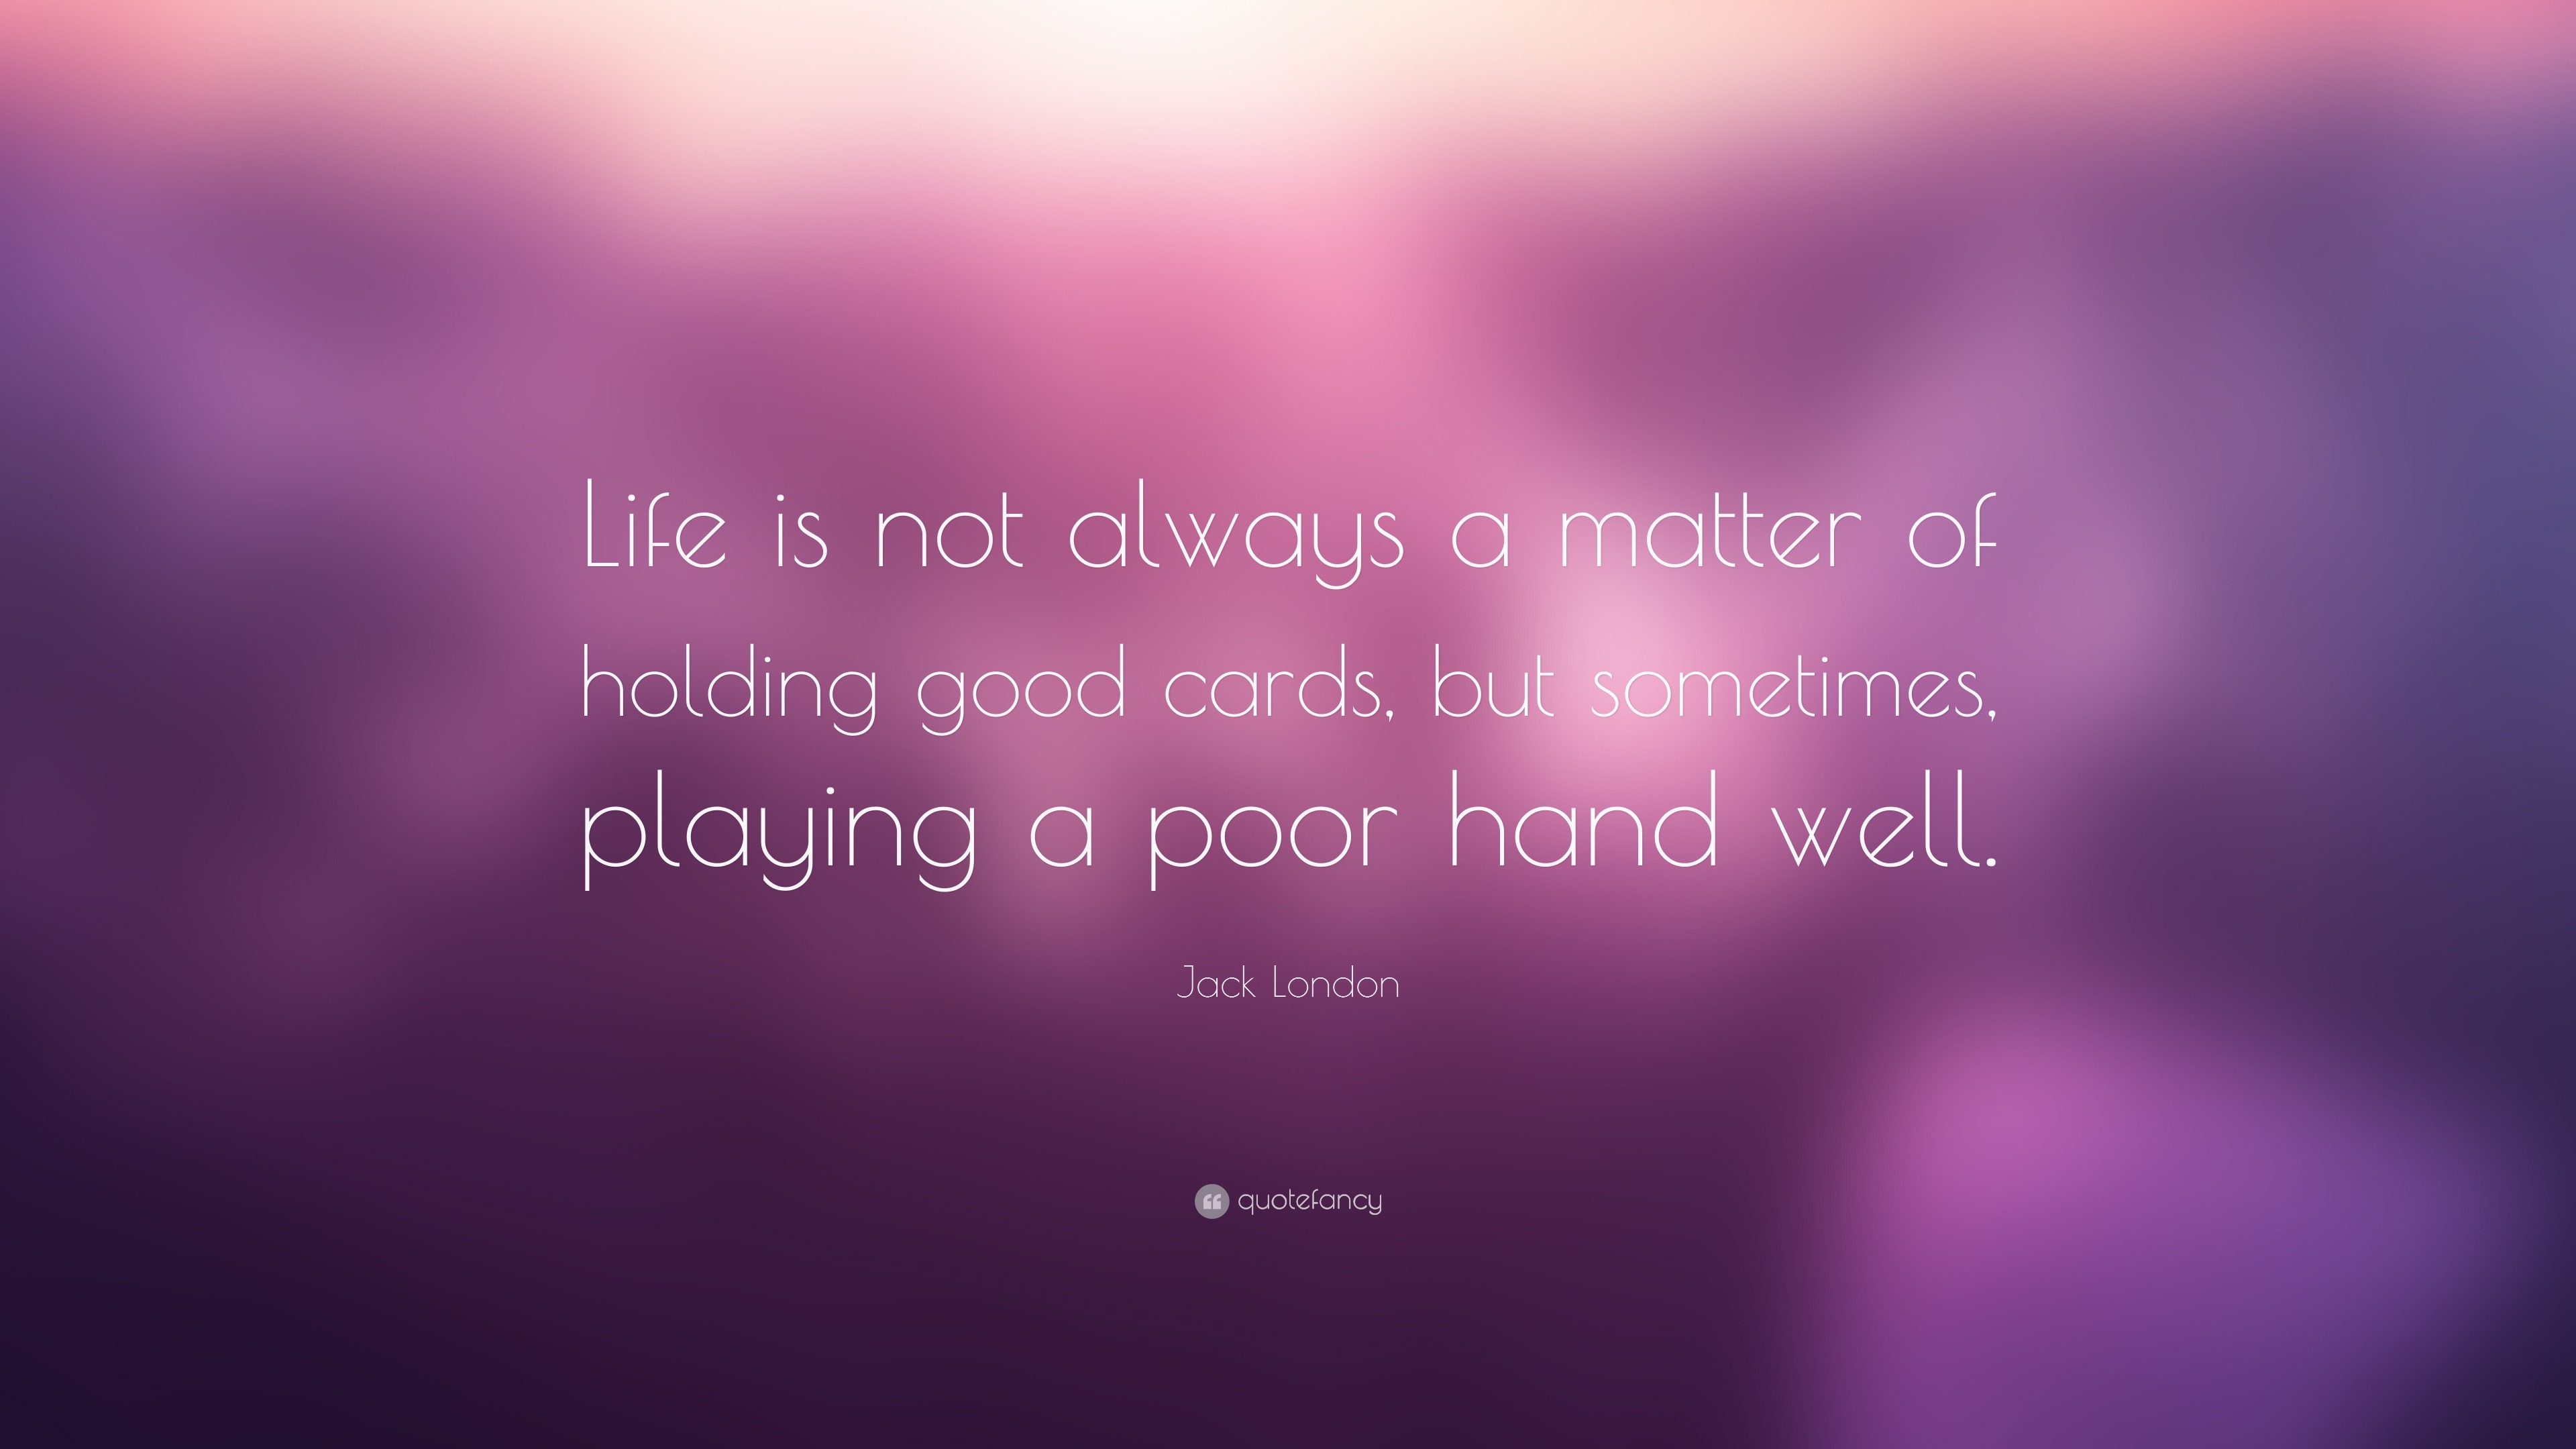 Jack London Quote “Life is not always a matter of holding good cards